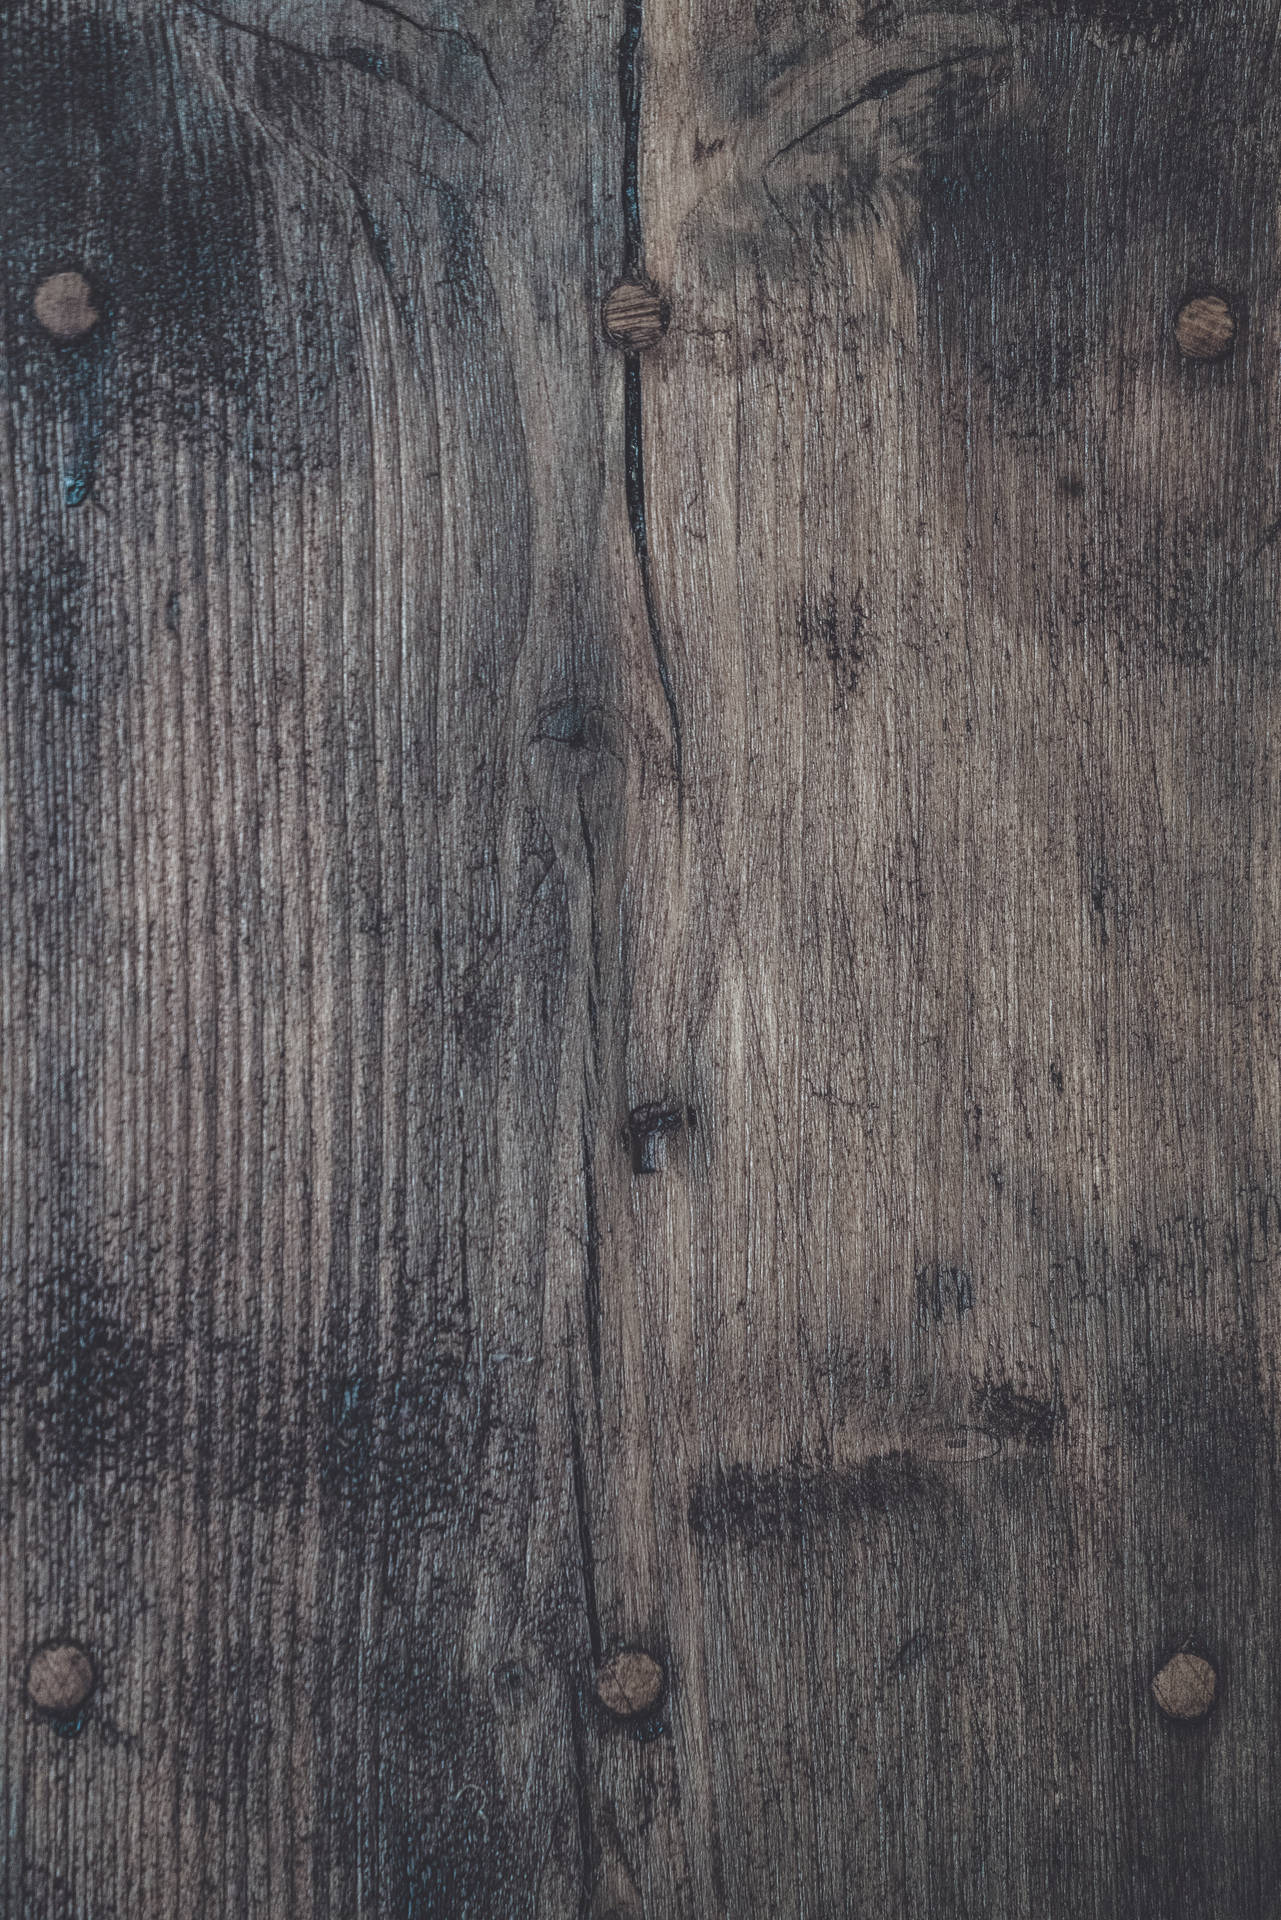 5304X7952 Wood Wallpaper and Background